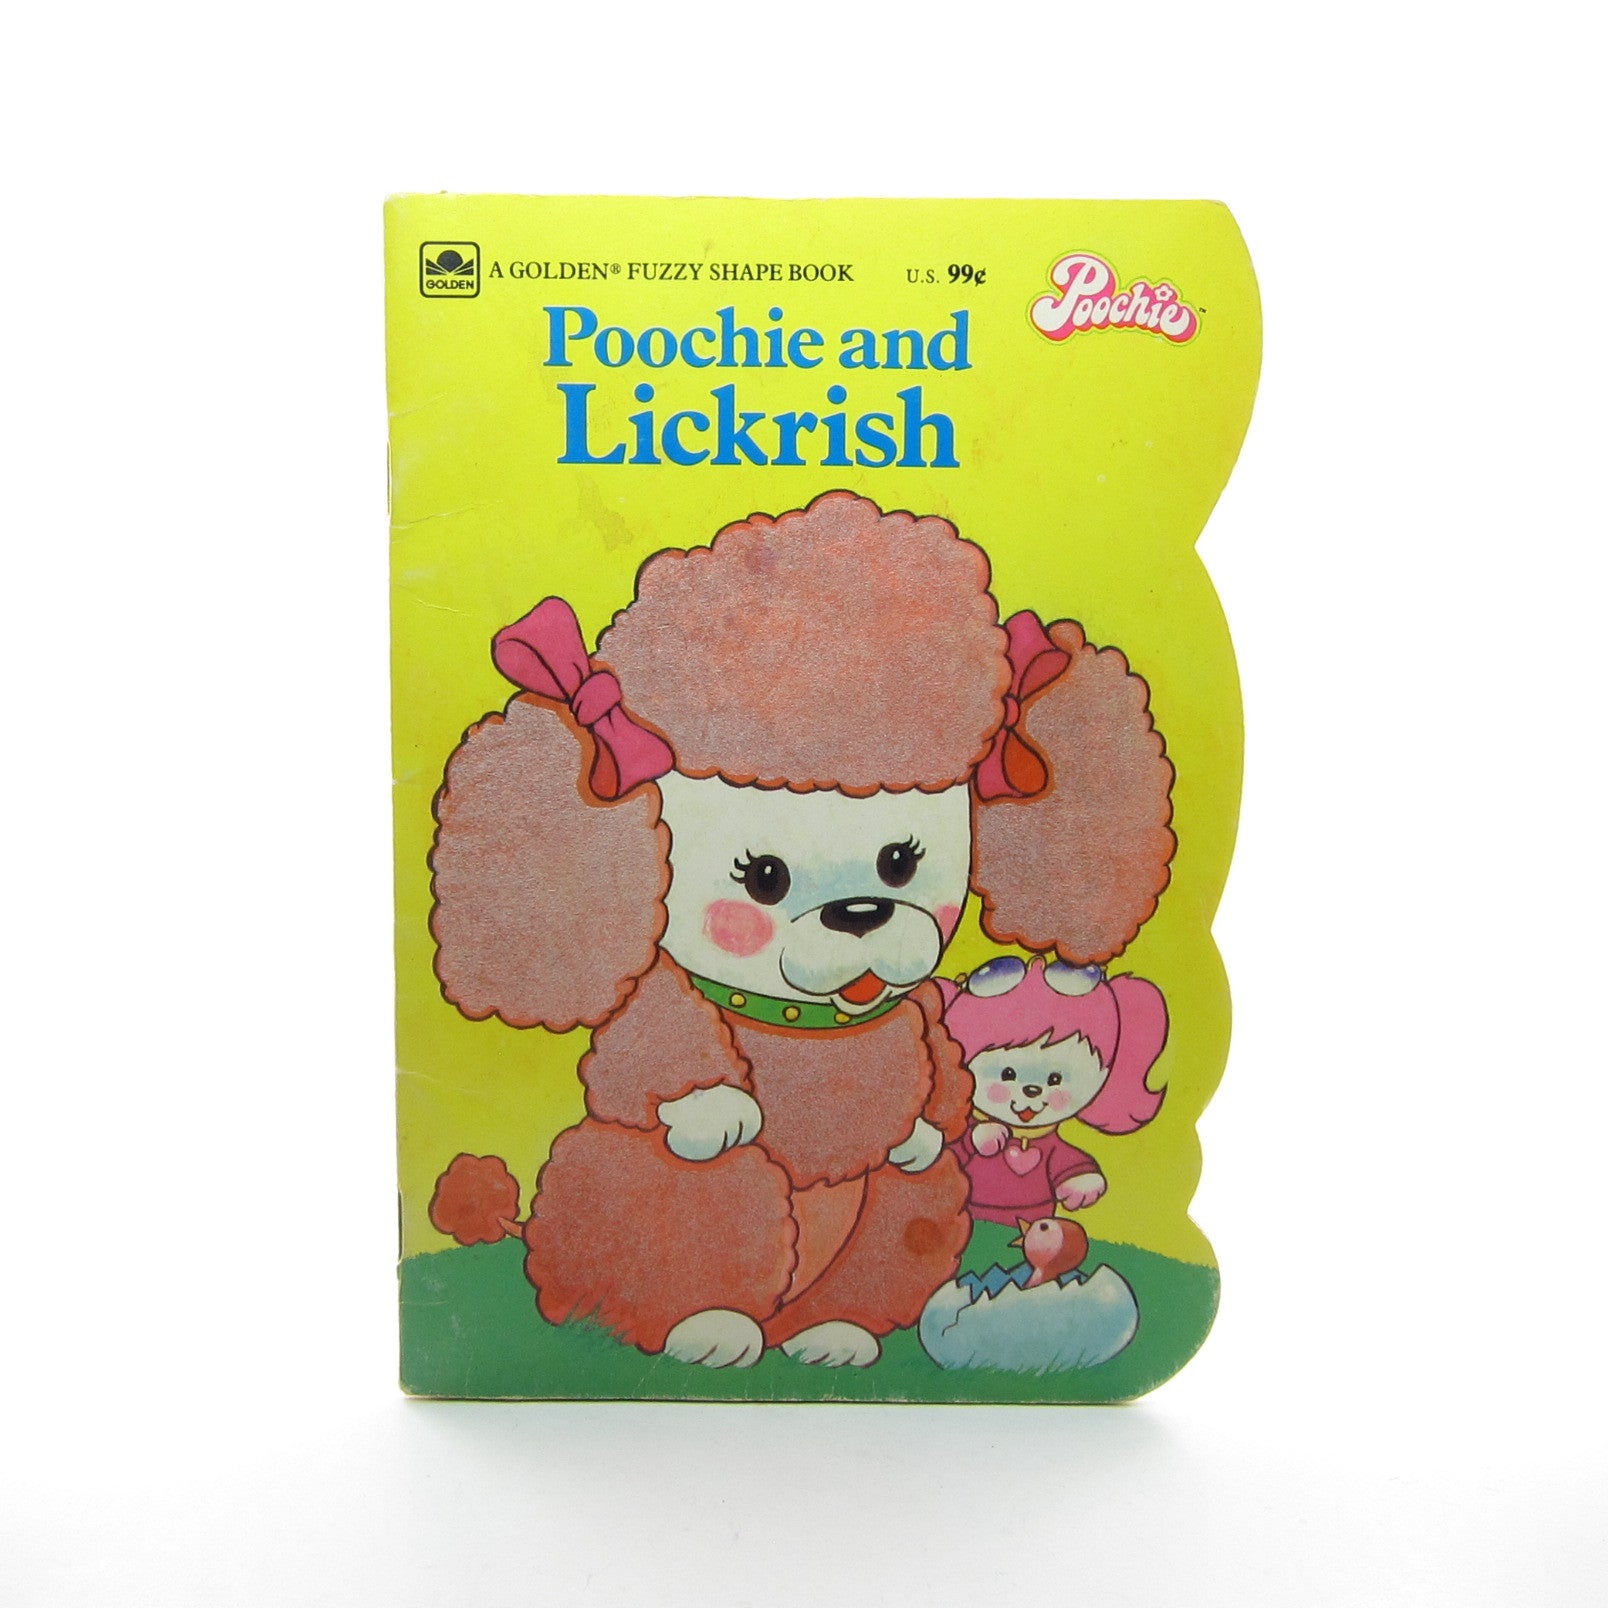 Poochie and Lickrish vintage Golden Fuzzy Shape book